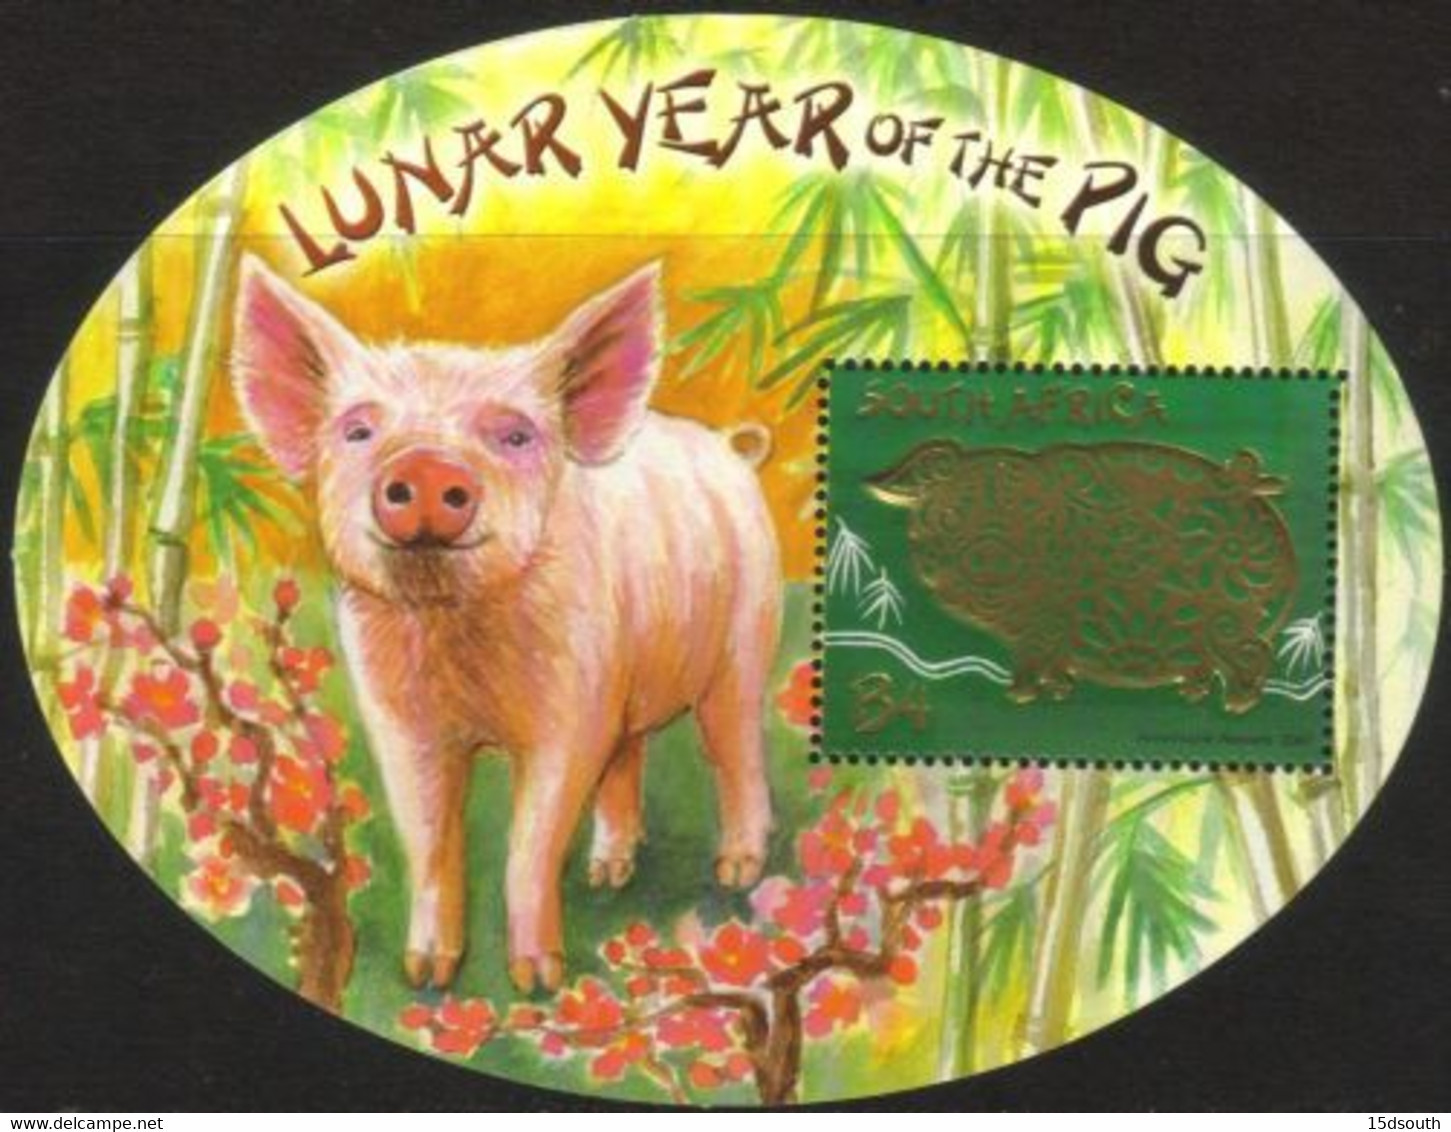 South Africa - 2007 Year Of The Pig MS (**) SG 1633 - Año Nuevo Chino